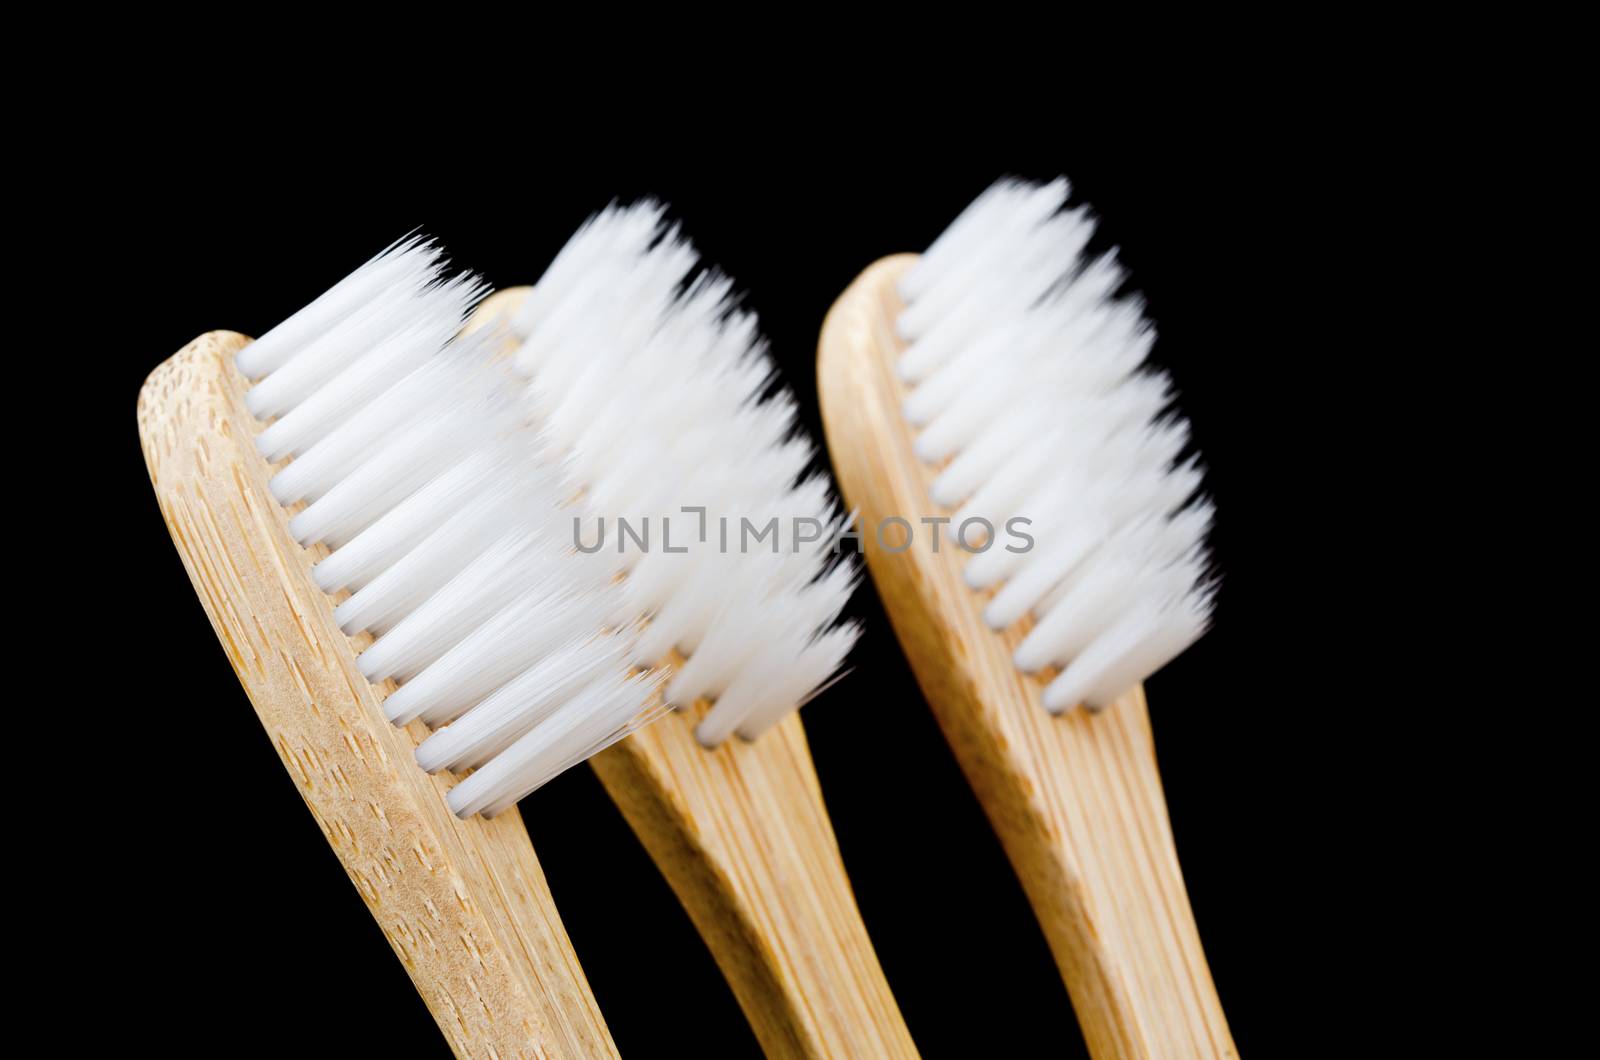 Bamboo toothbrush on black background. by Gamjai